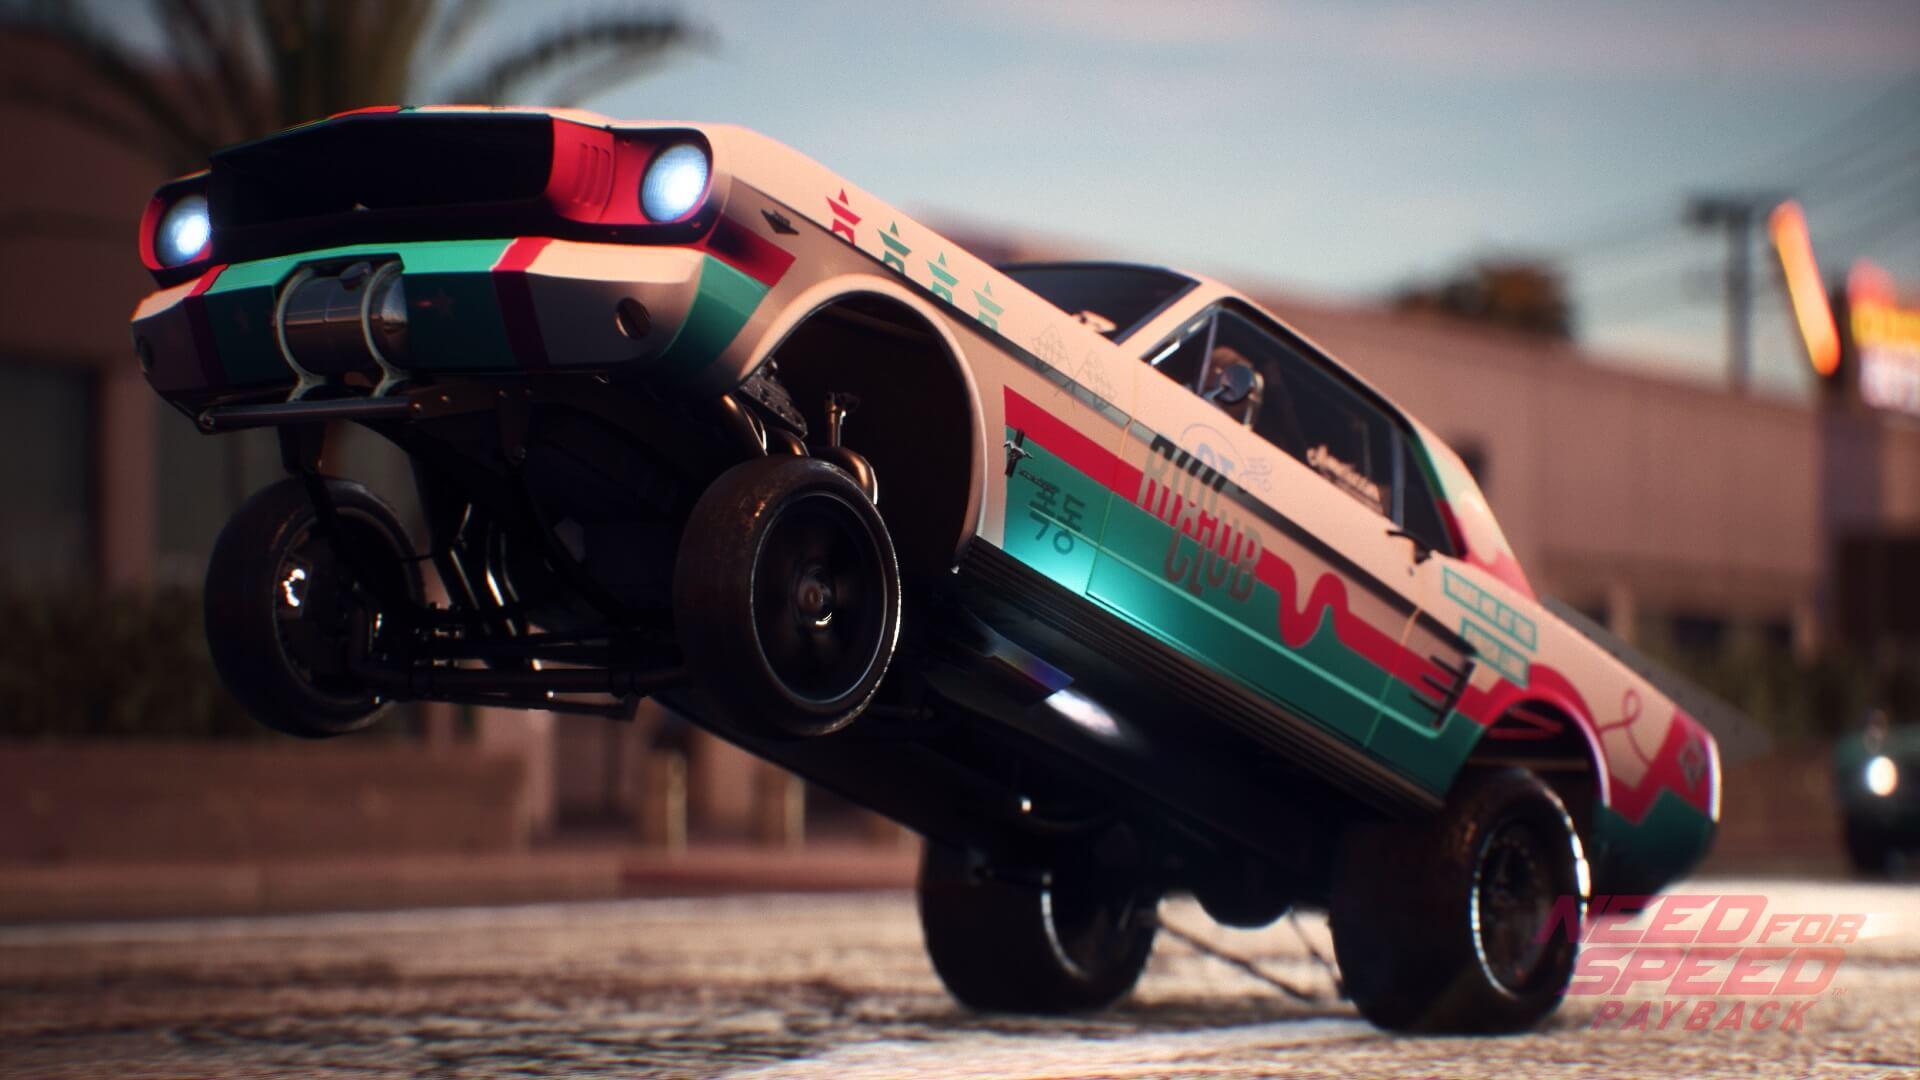 pc need for speed payback